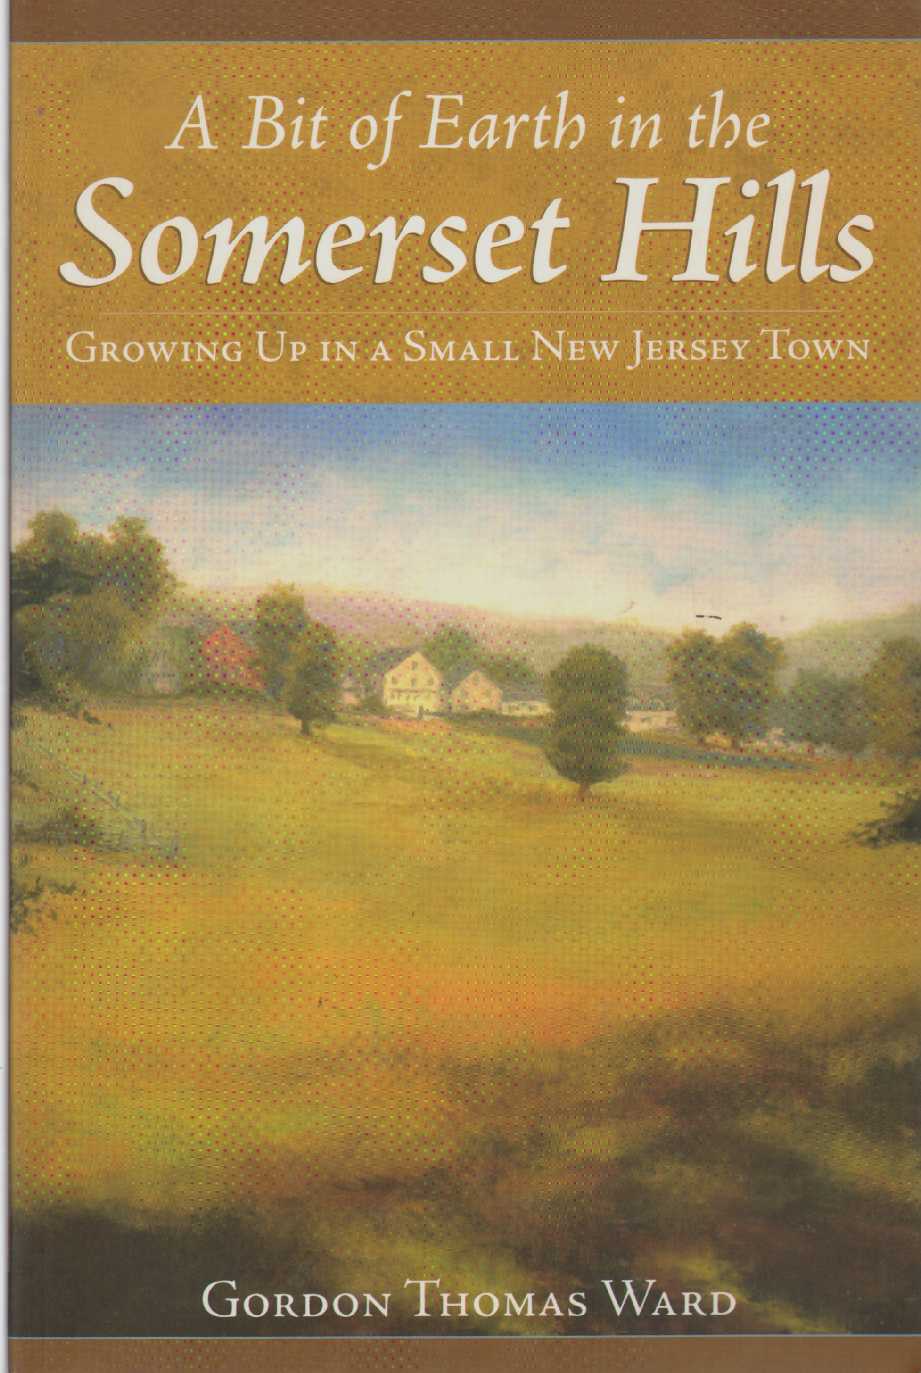 Image for A BIT OF EARTH IN THE SOMERSET HILLS Growing Up in a Small New Jersey Town